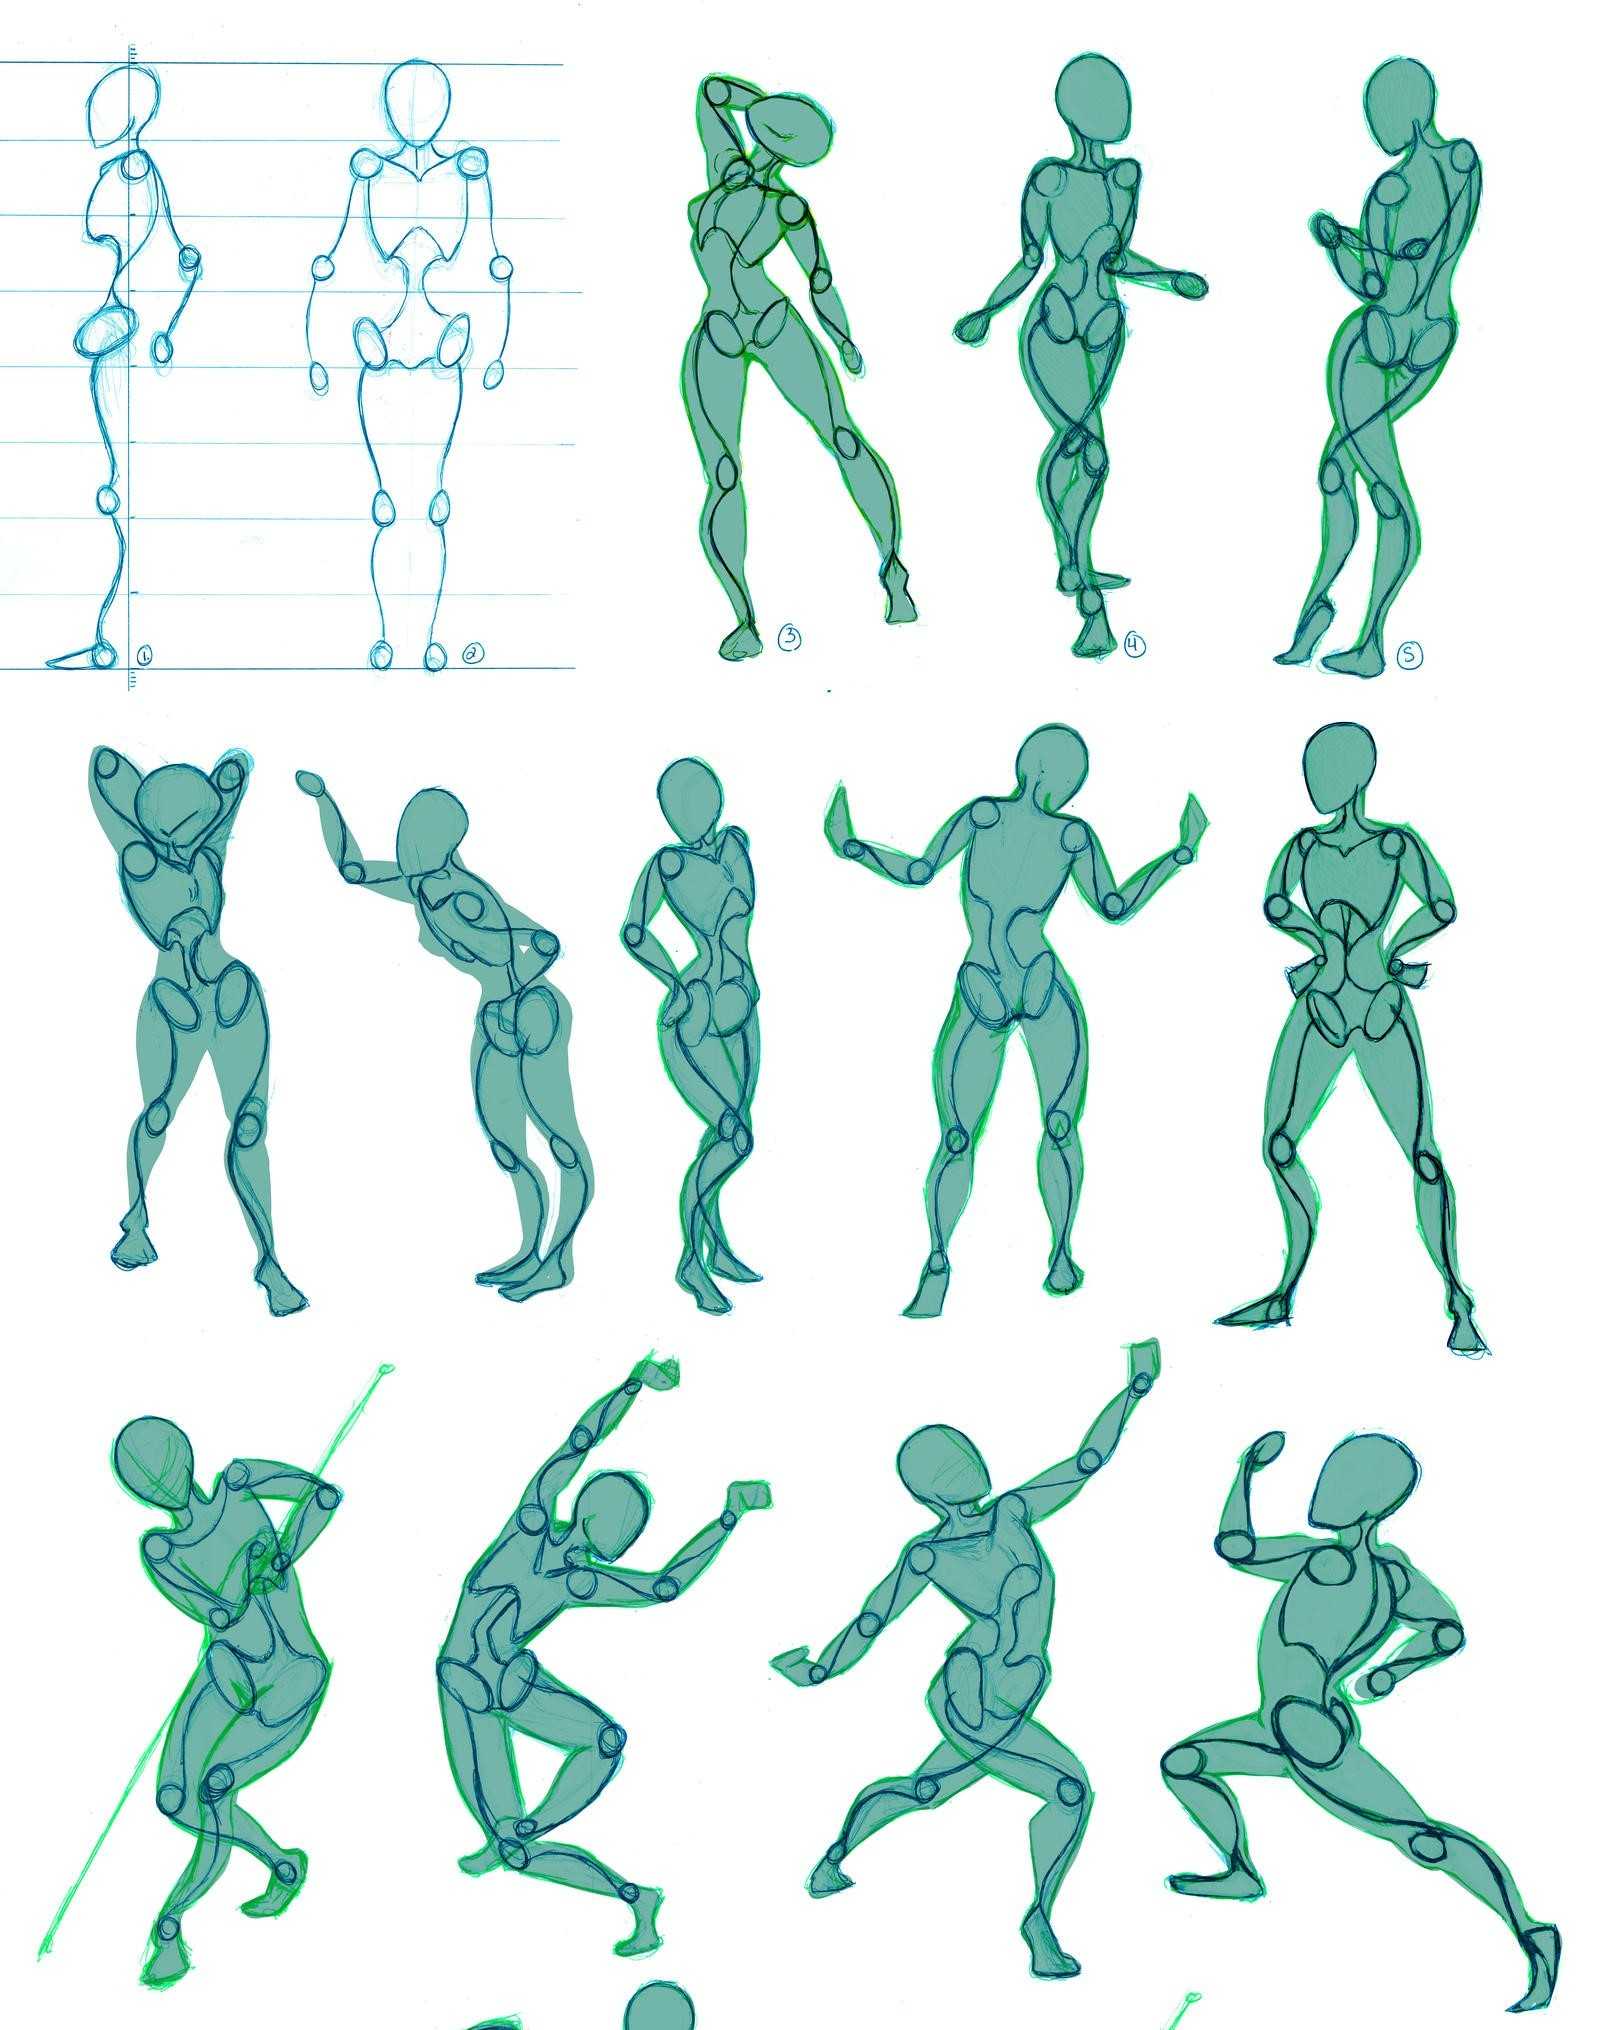 standing pose reference standing pose drawing reference standing pose art reference standing drawing reference 3